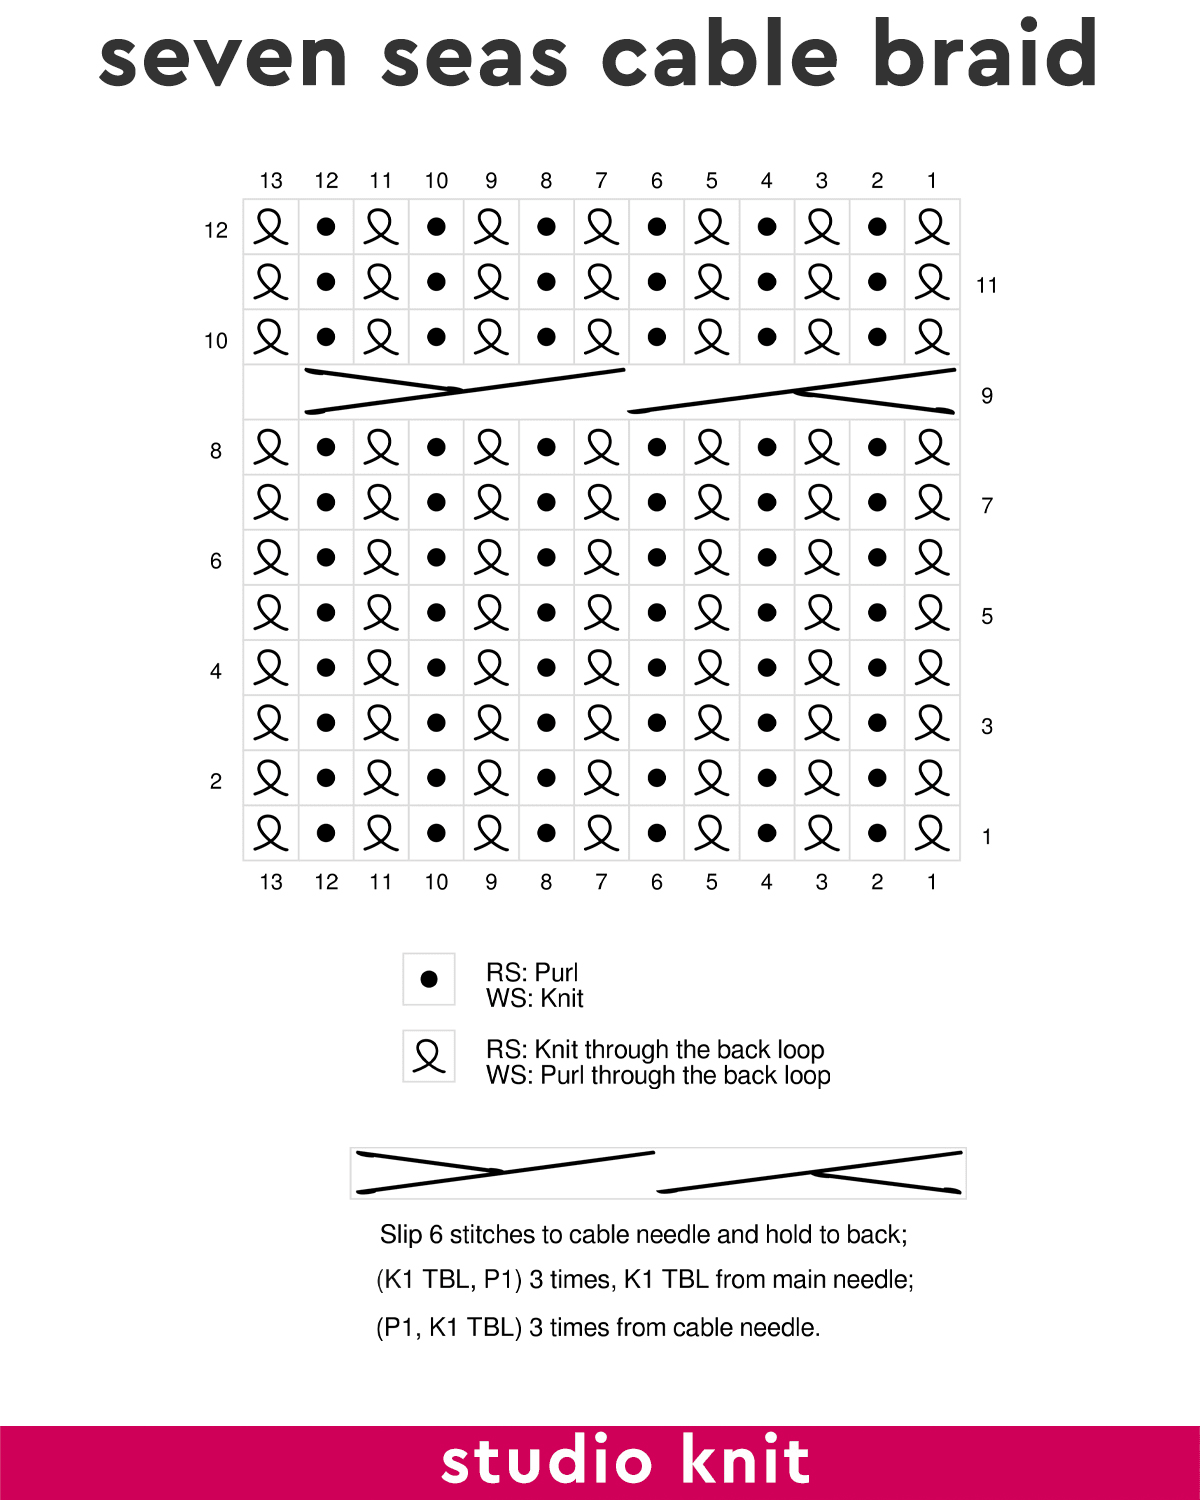 Knitting chart of the Seven Seas Cable Braid stitch pattern by Studio Knit.